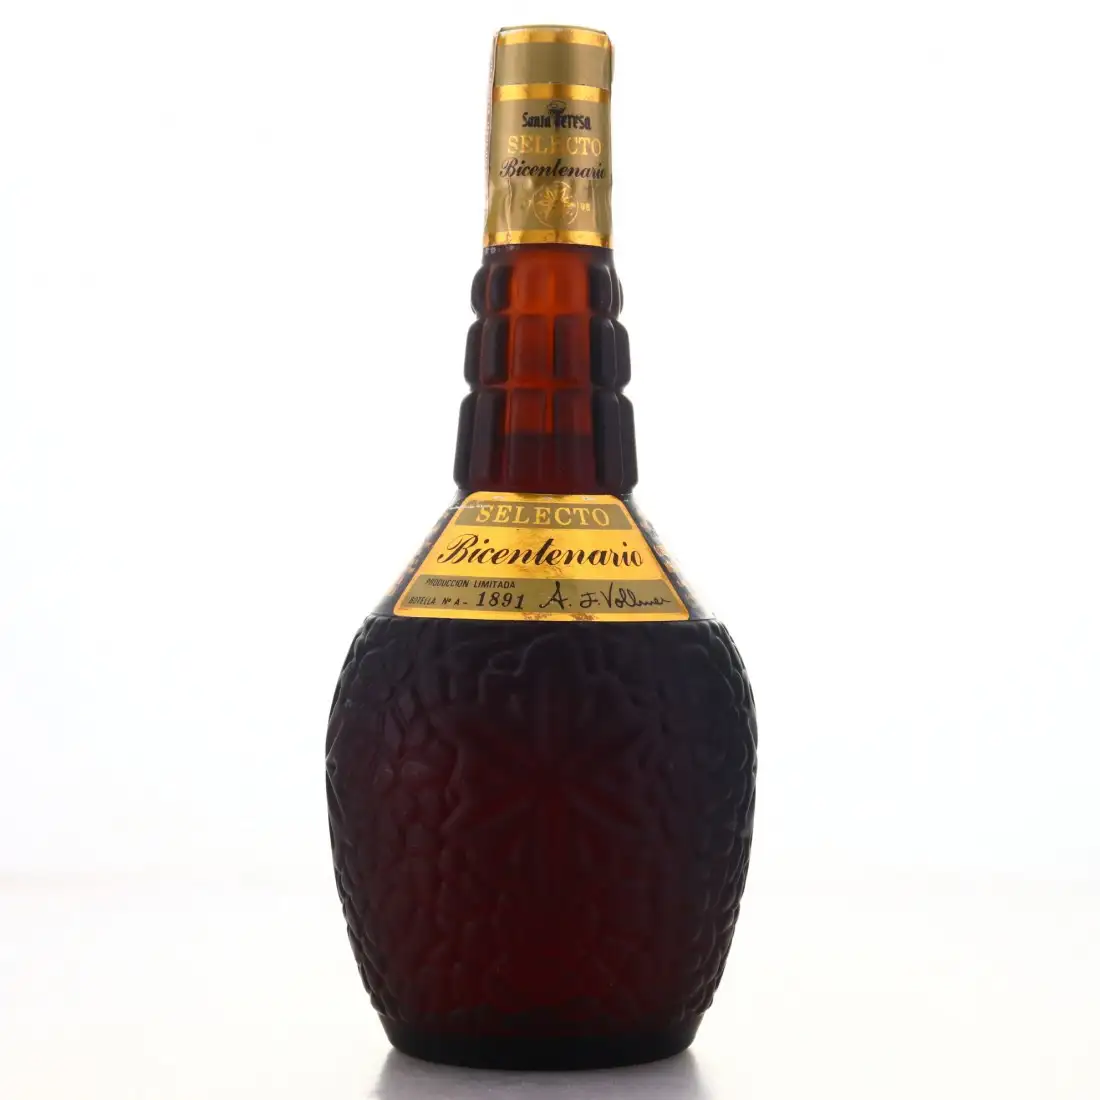 Image of the front of the bottle of the rum Bicentenario A.J. Vollmer